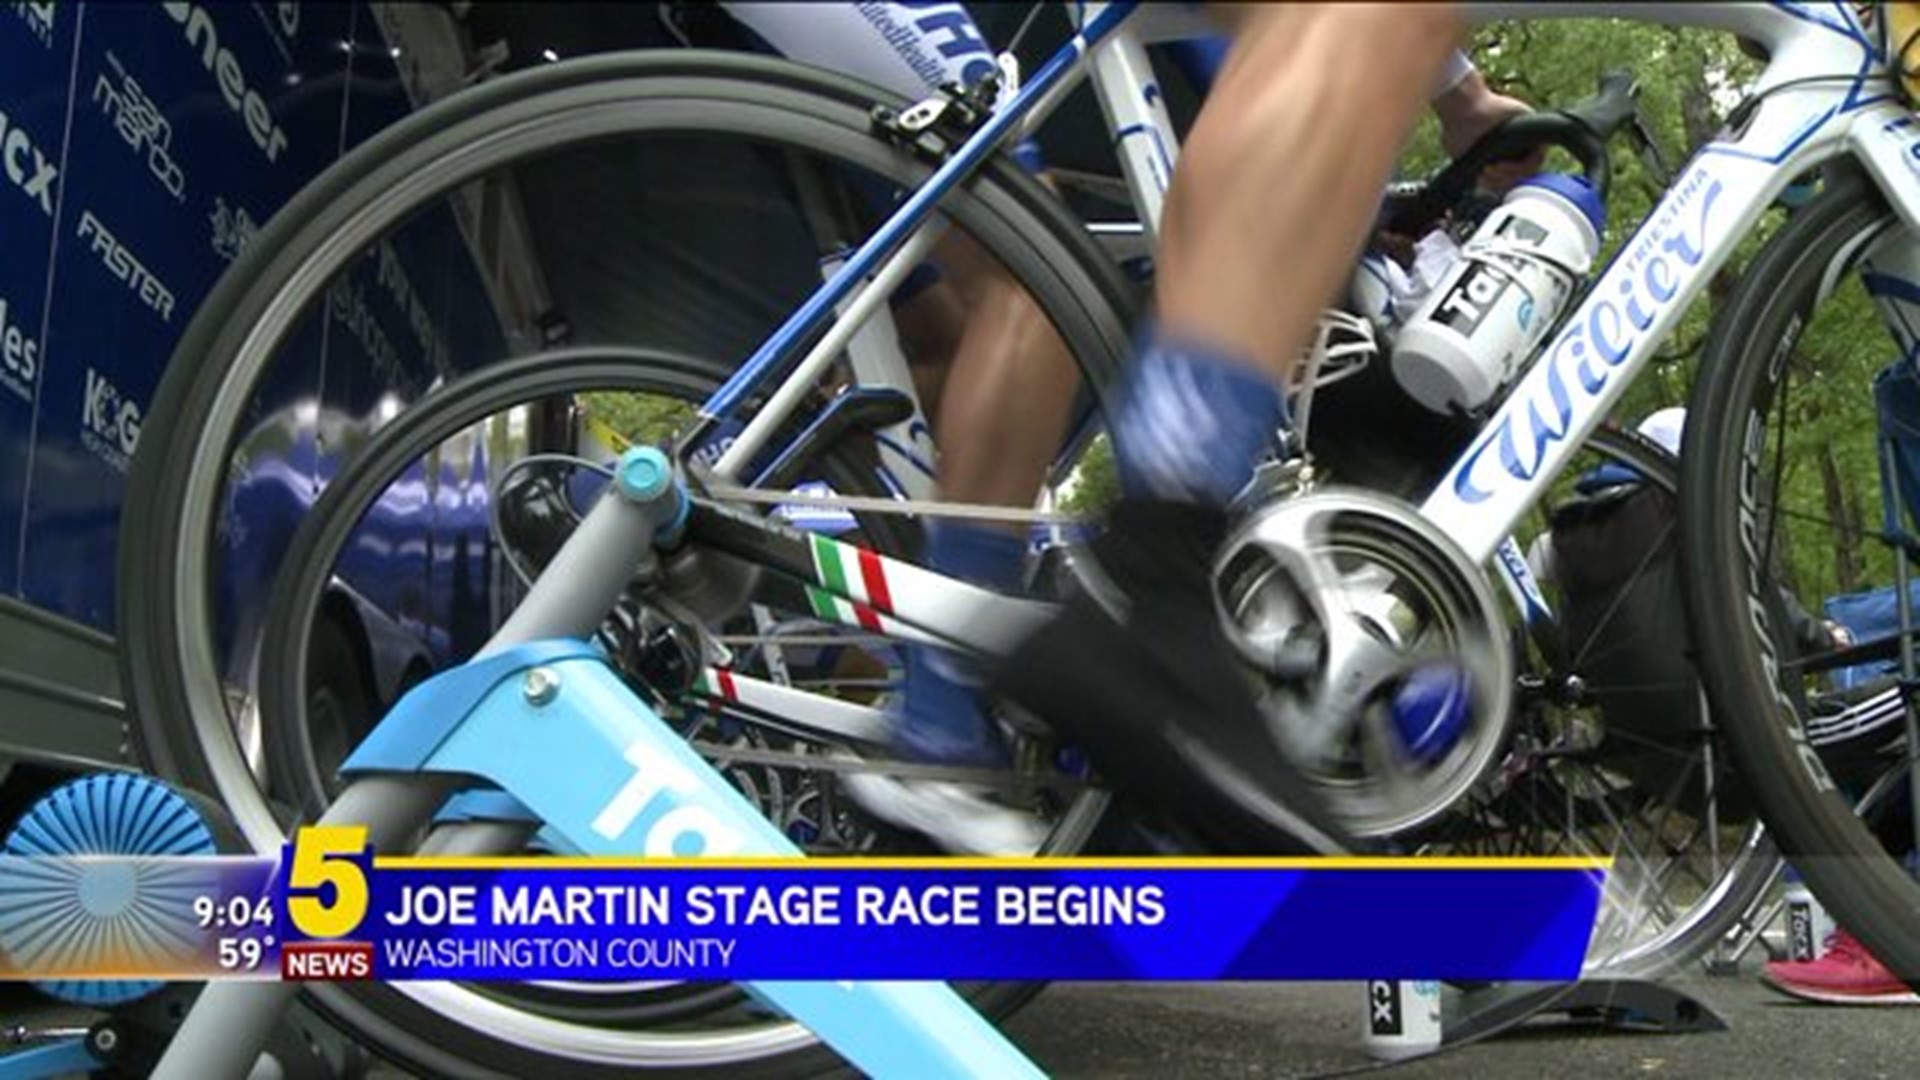 Joe Martin Stage Race Kicks Off With Time Trials